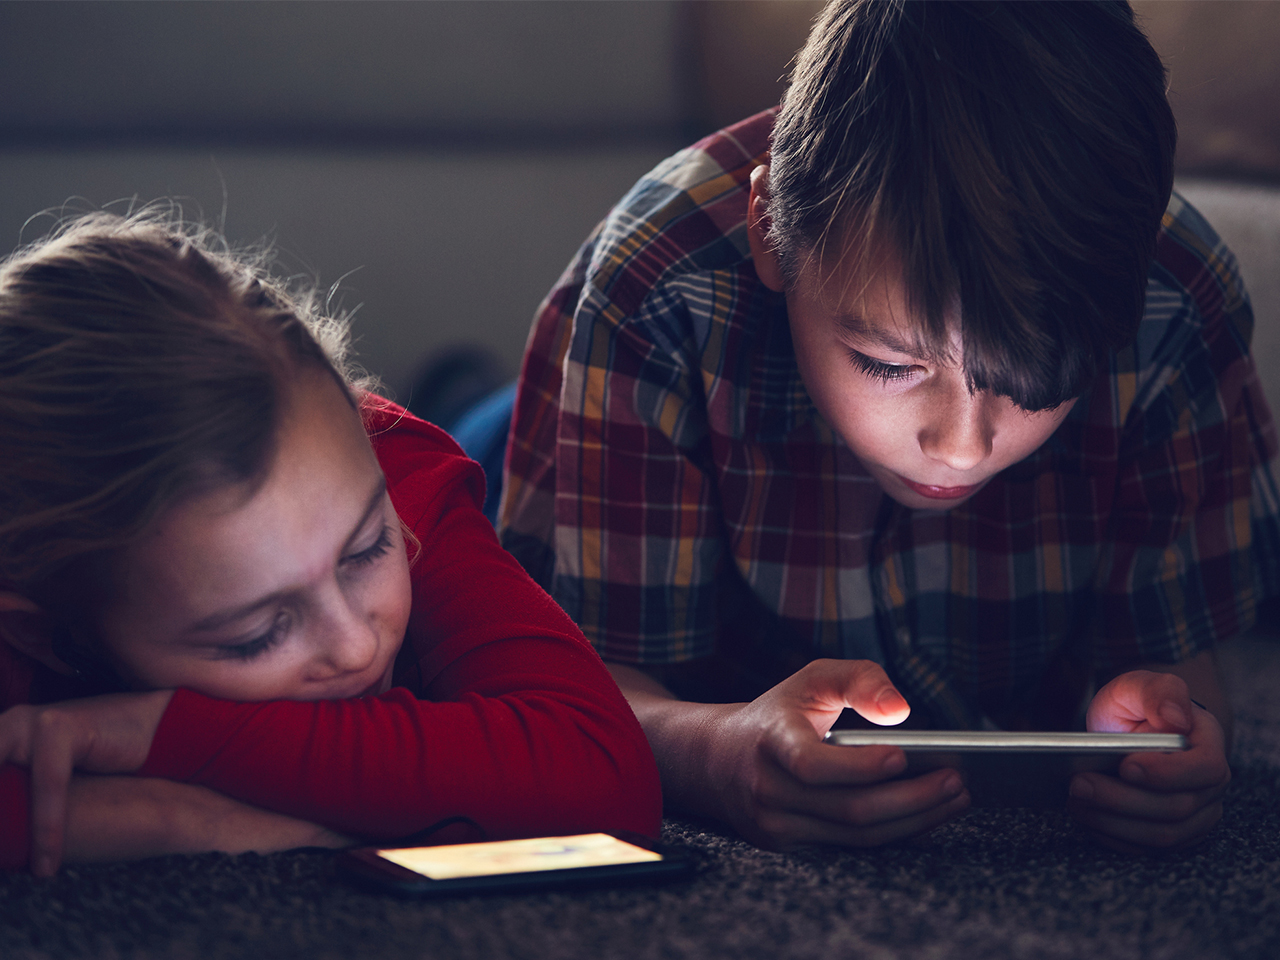 Excessive screen time in kids under 5 is worse than we thought